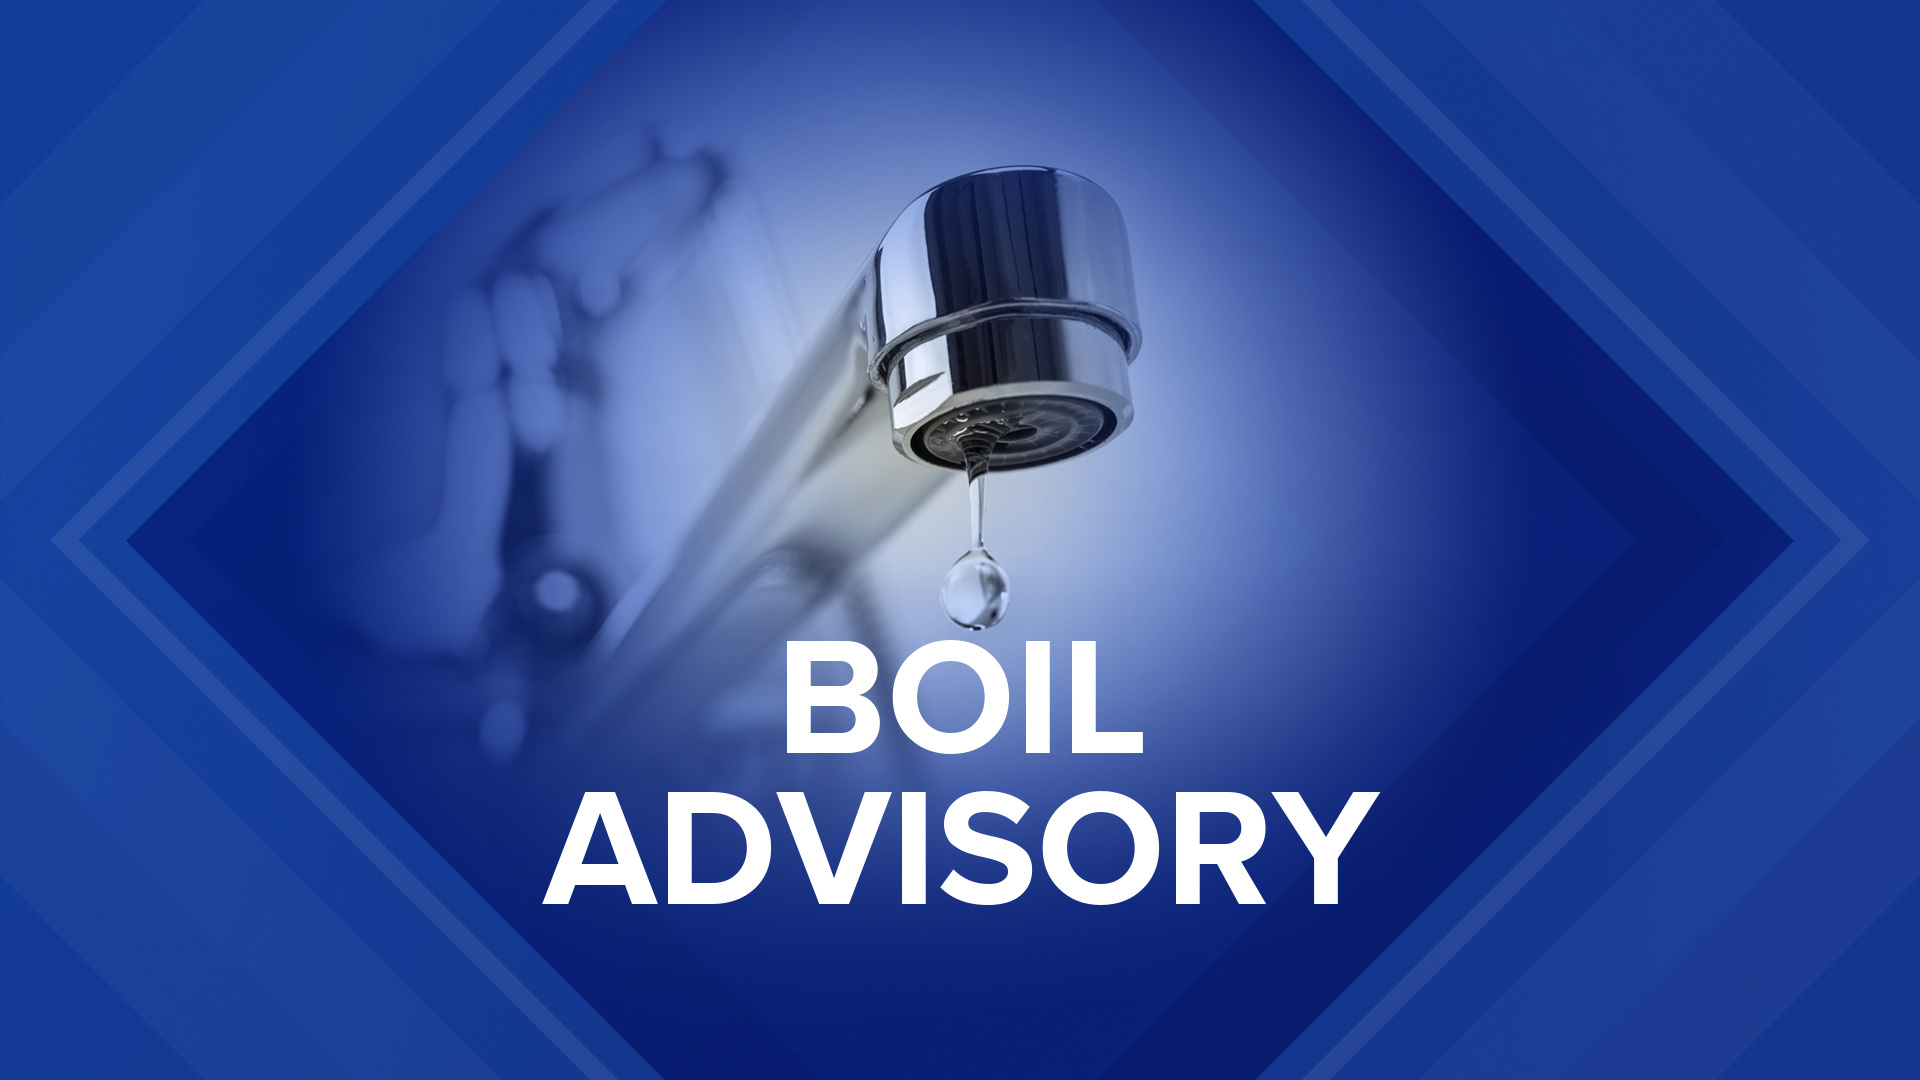 The advisory is due to a water service line break.